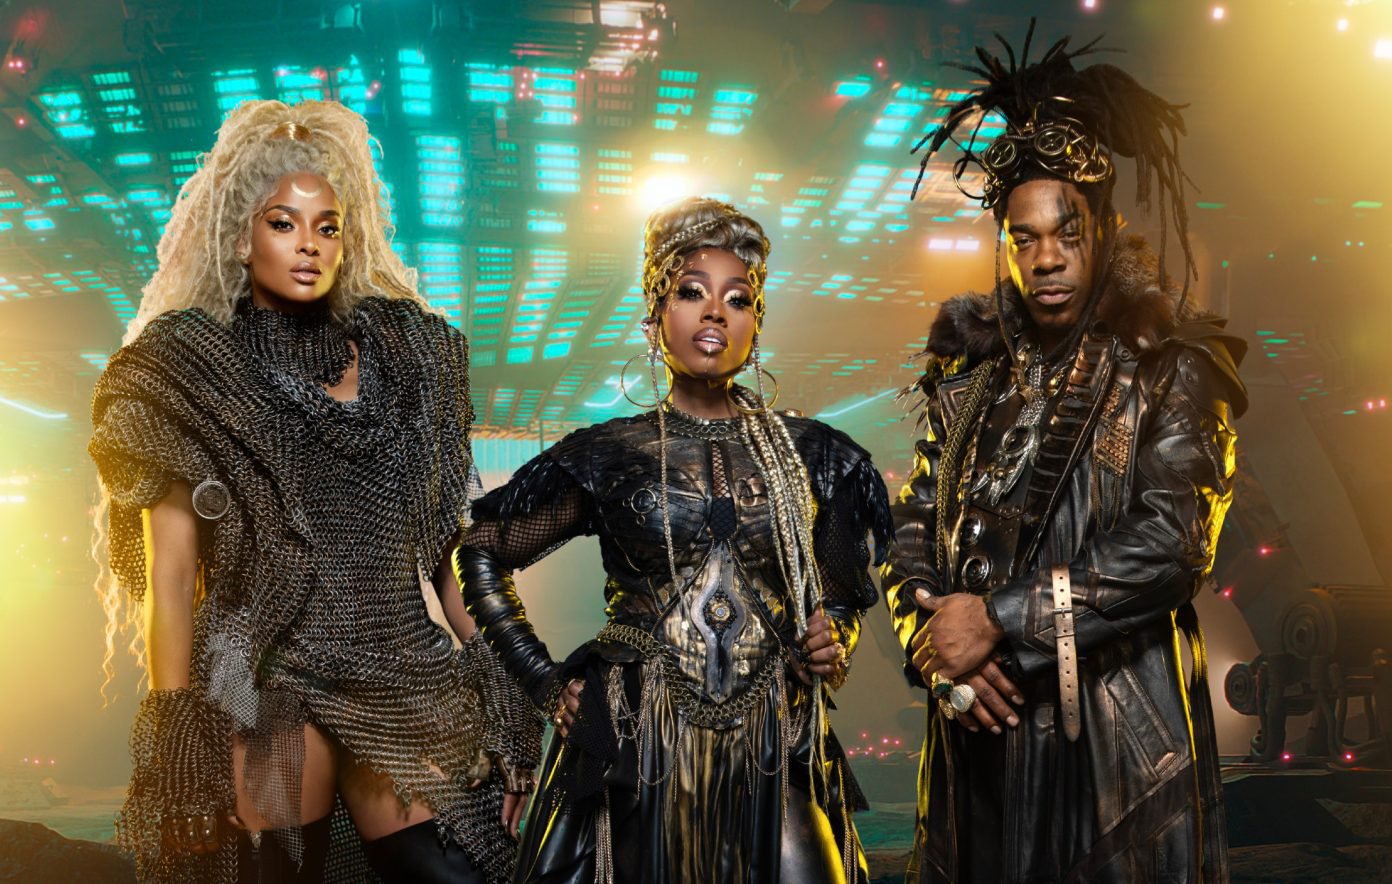 She will perform alongside Ciara (left), Busta Rhymes (right), and producer Timbaland